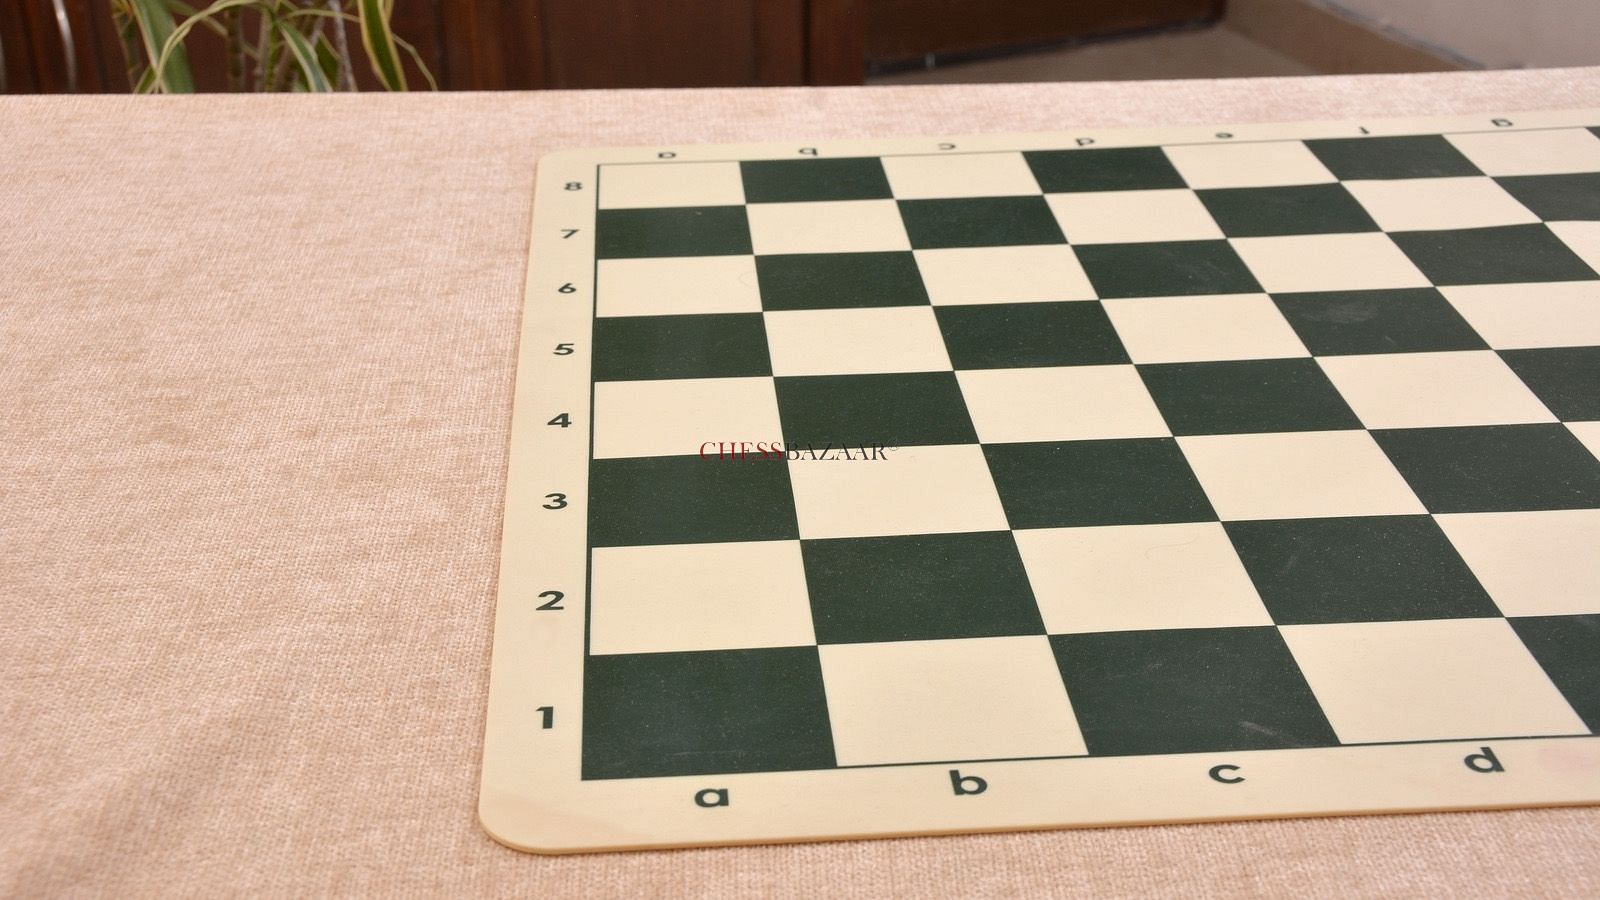 Roll-up Chess Board with Algebraic Notation